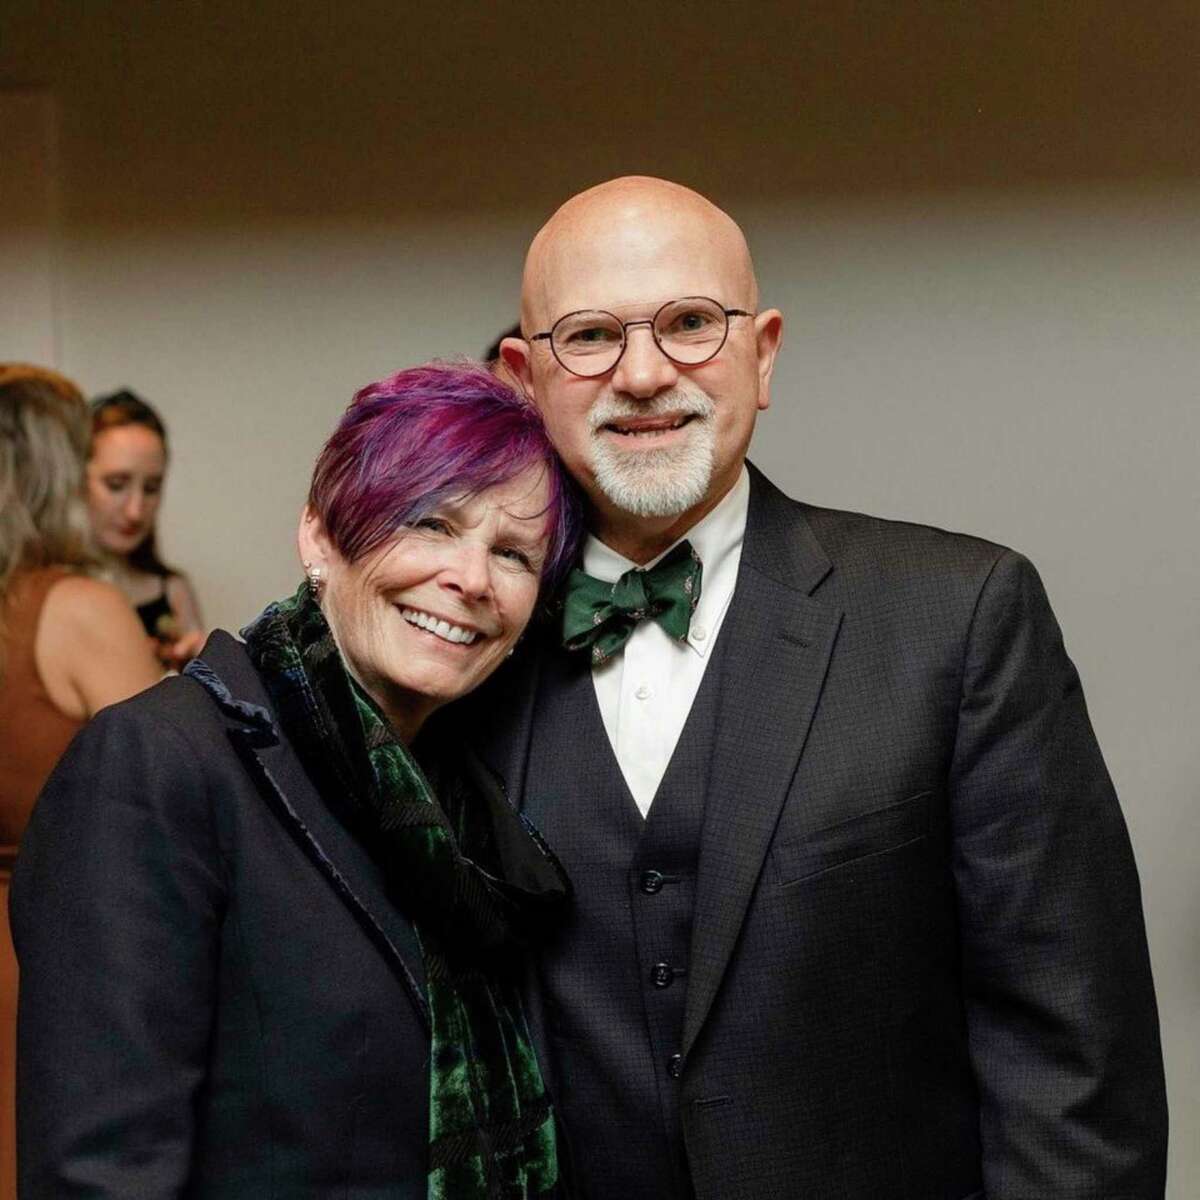 Rob Stowell, right, is pictured with his wife Kathleen Stowell. Rob Stowell experiences continued symptoms from his bout with COVID-19 in 2020, when he was hospitalized. 